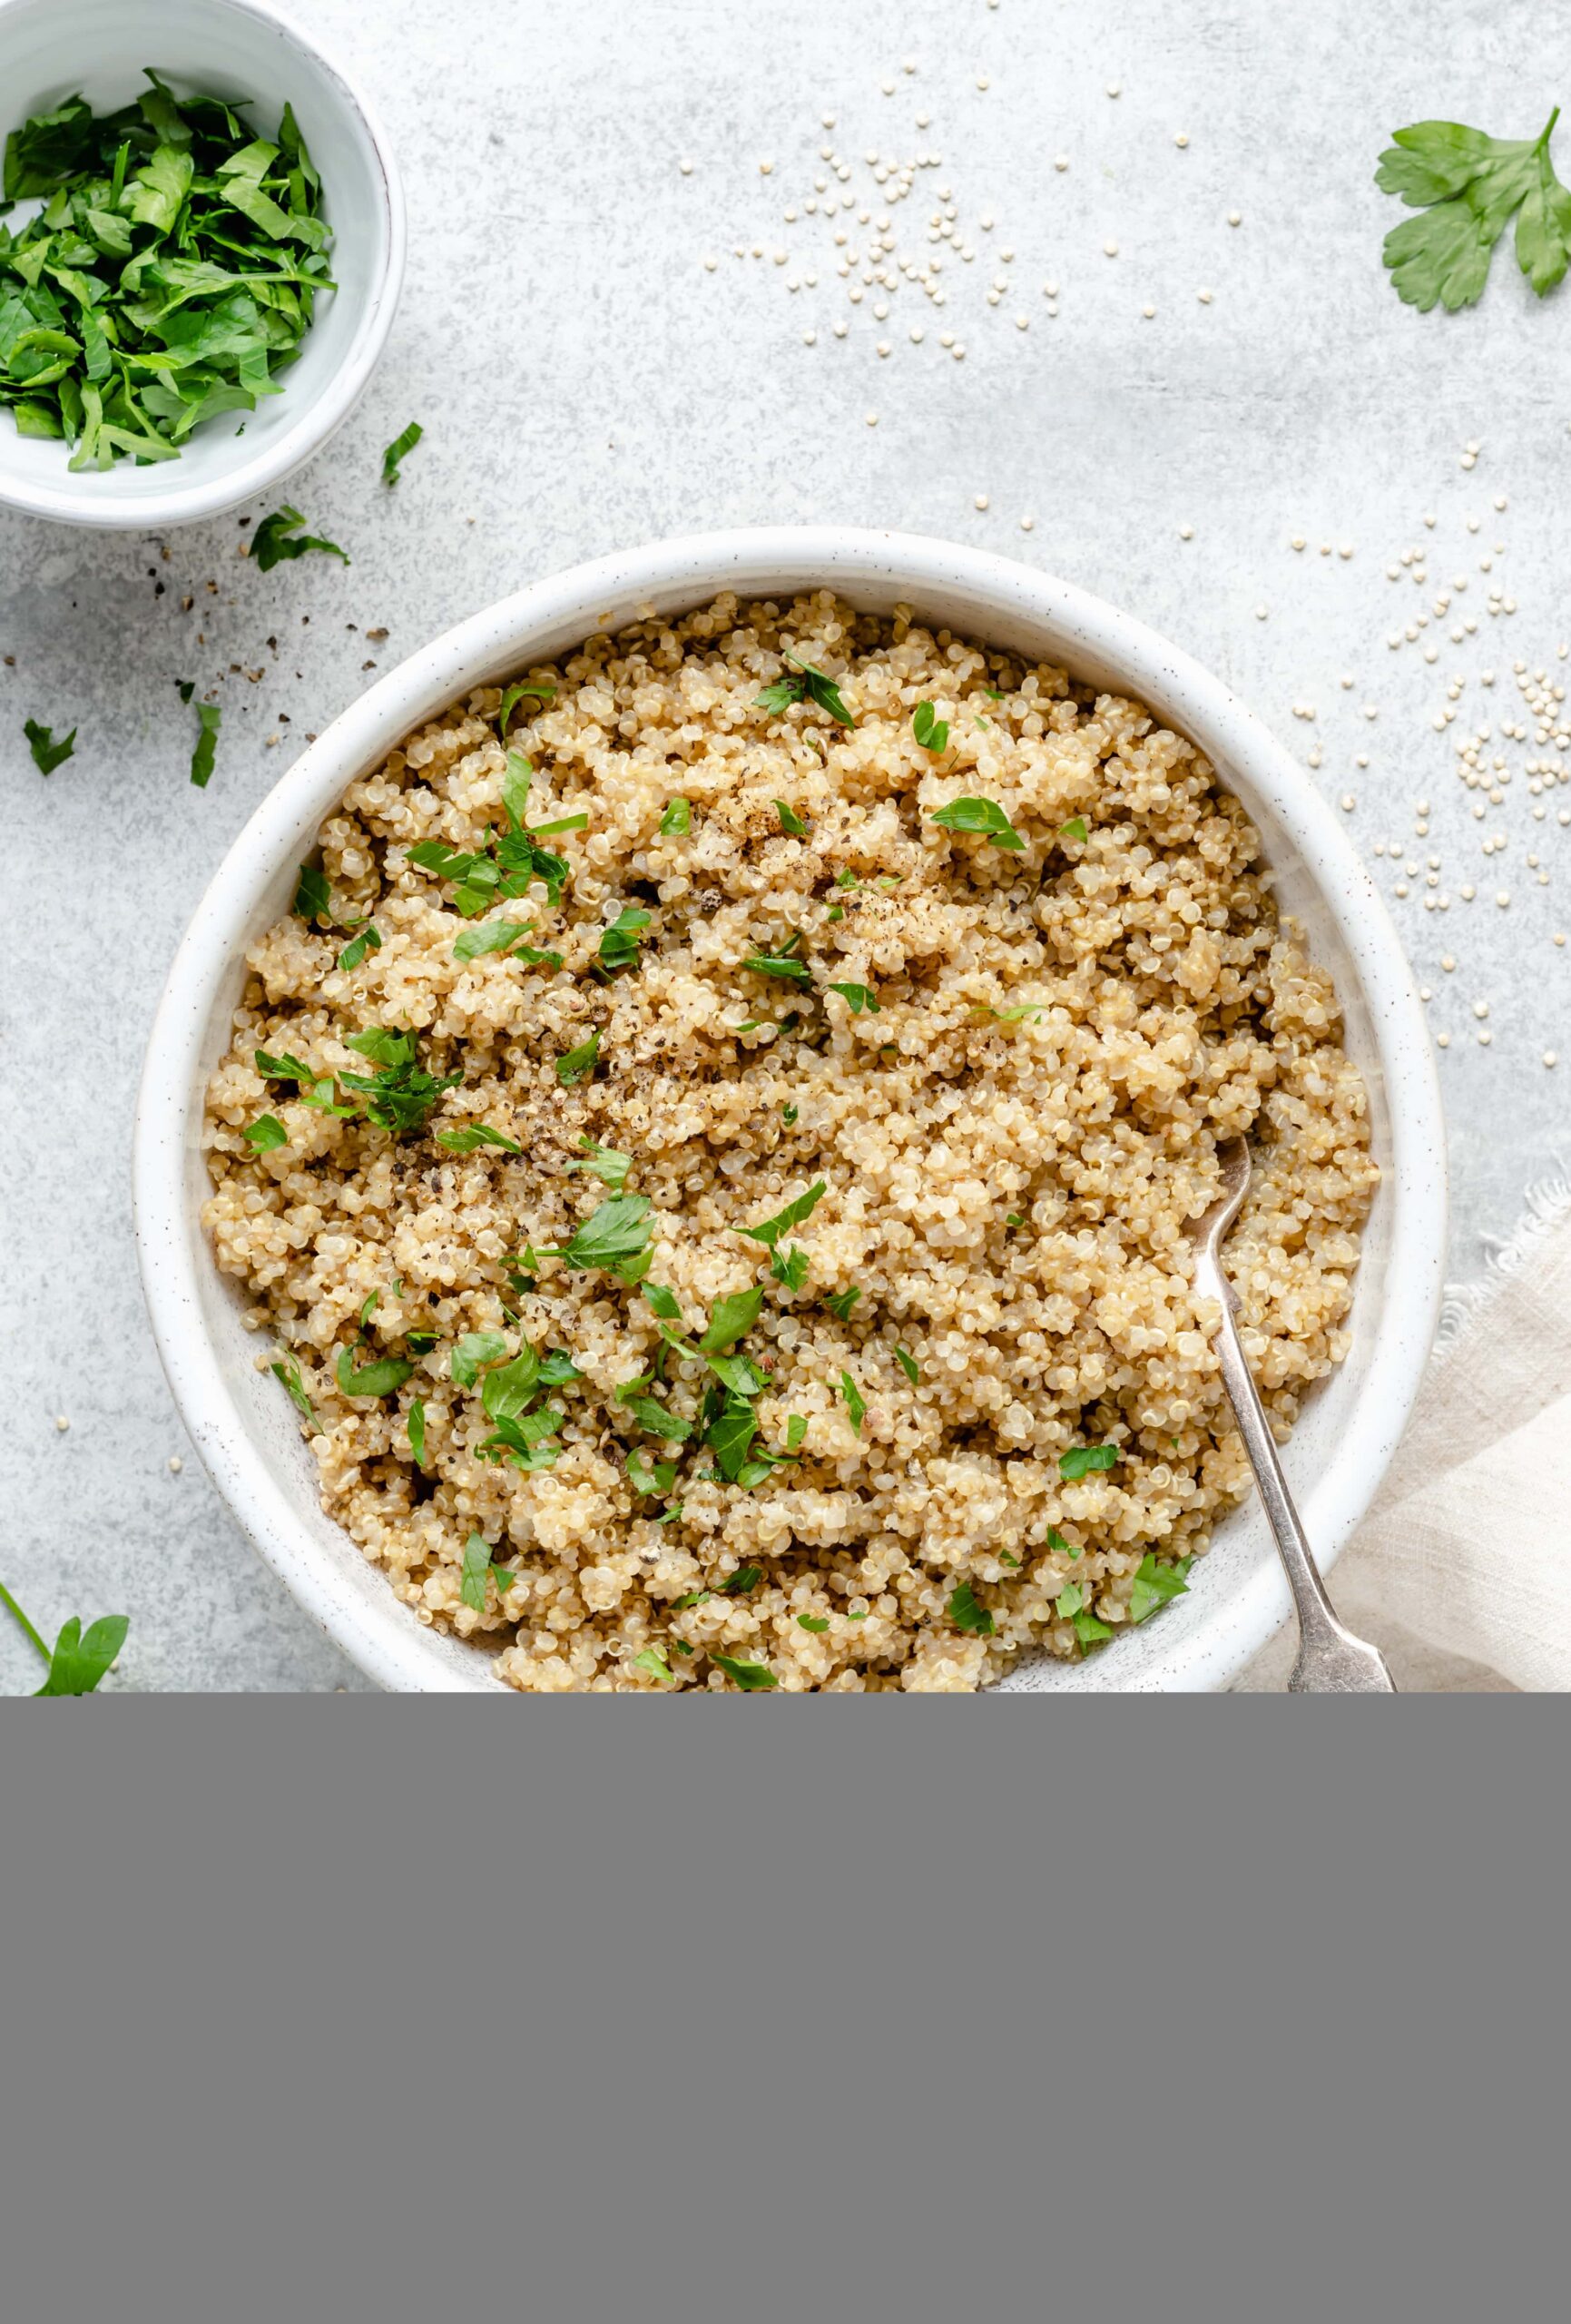 cooked quinoa in bowl with fork